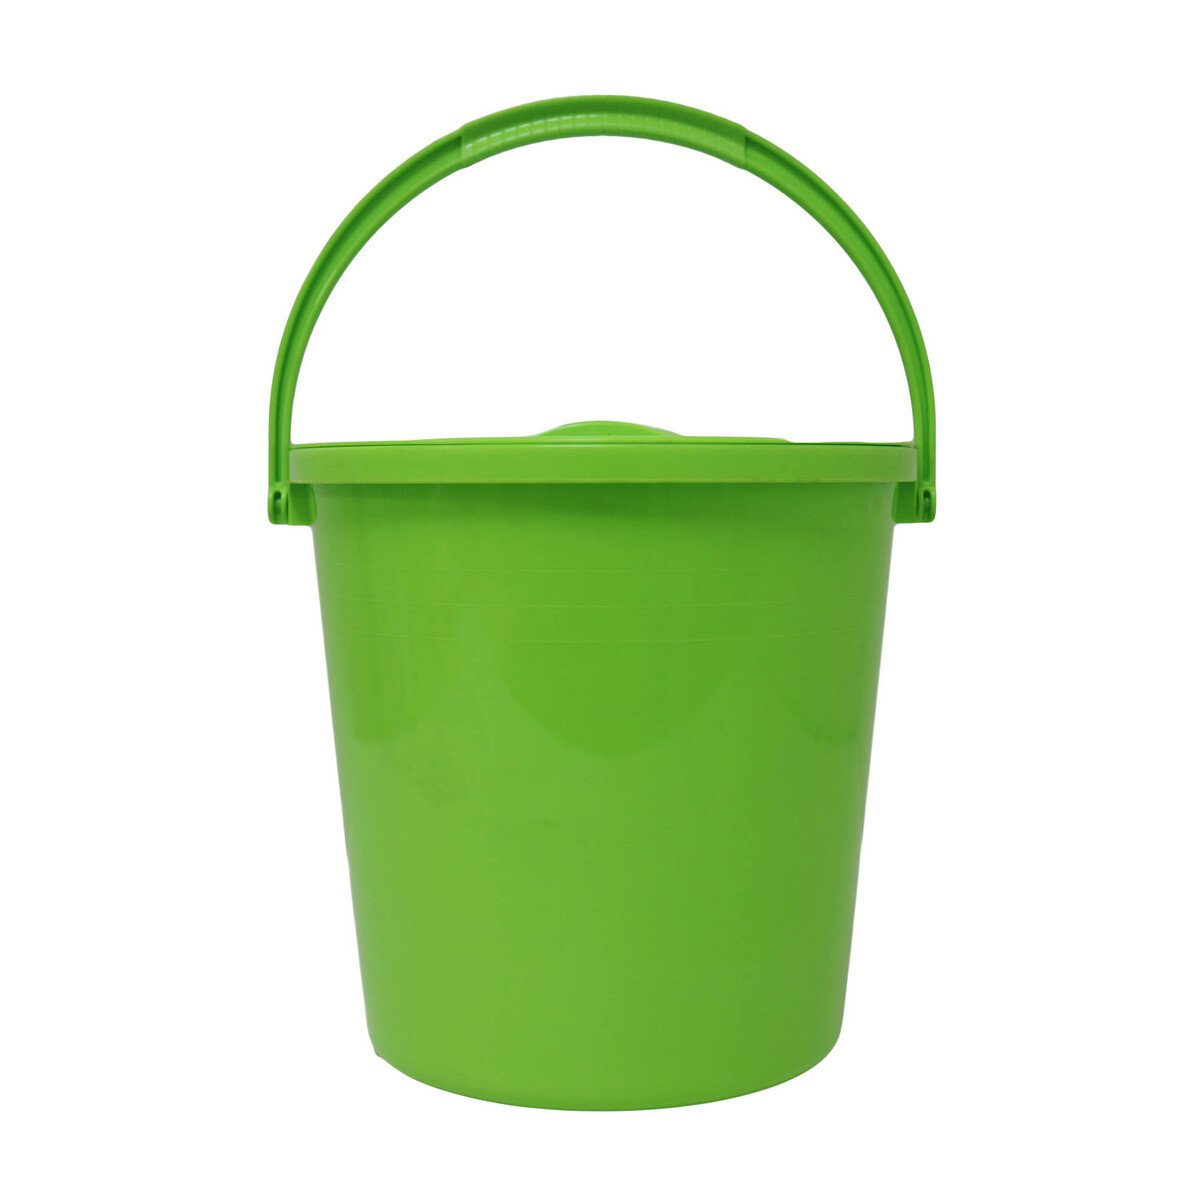 Elianware Pail With Cover 4L 1821-24